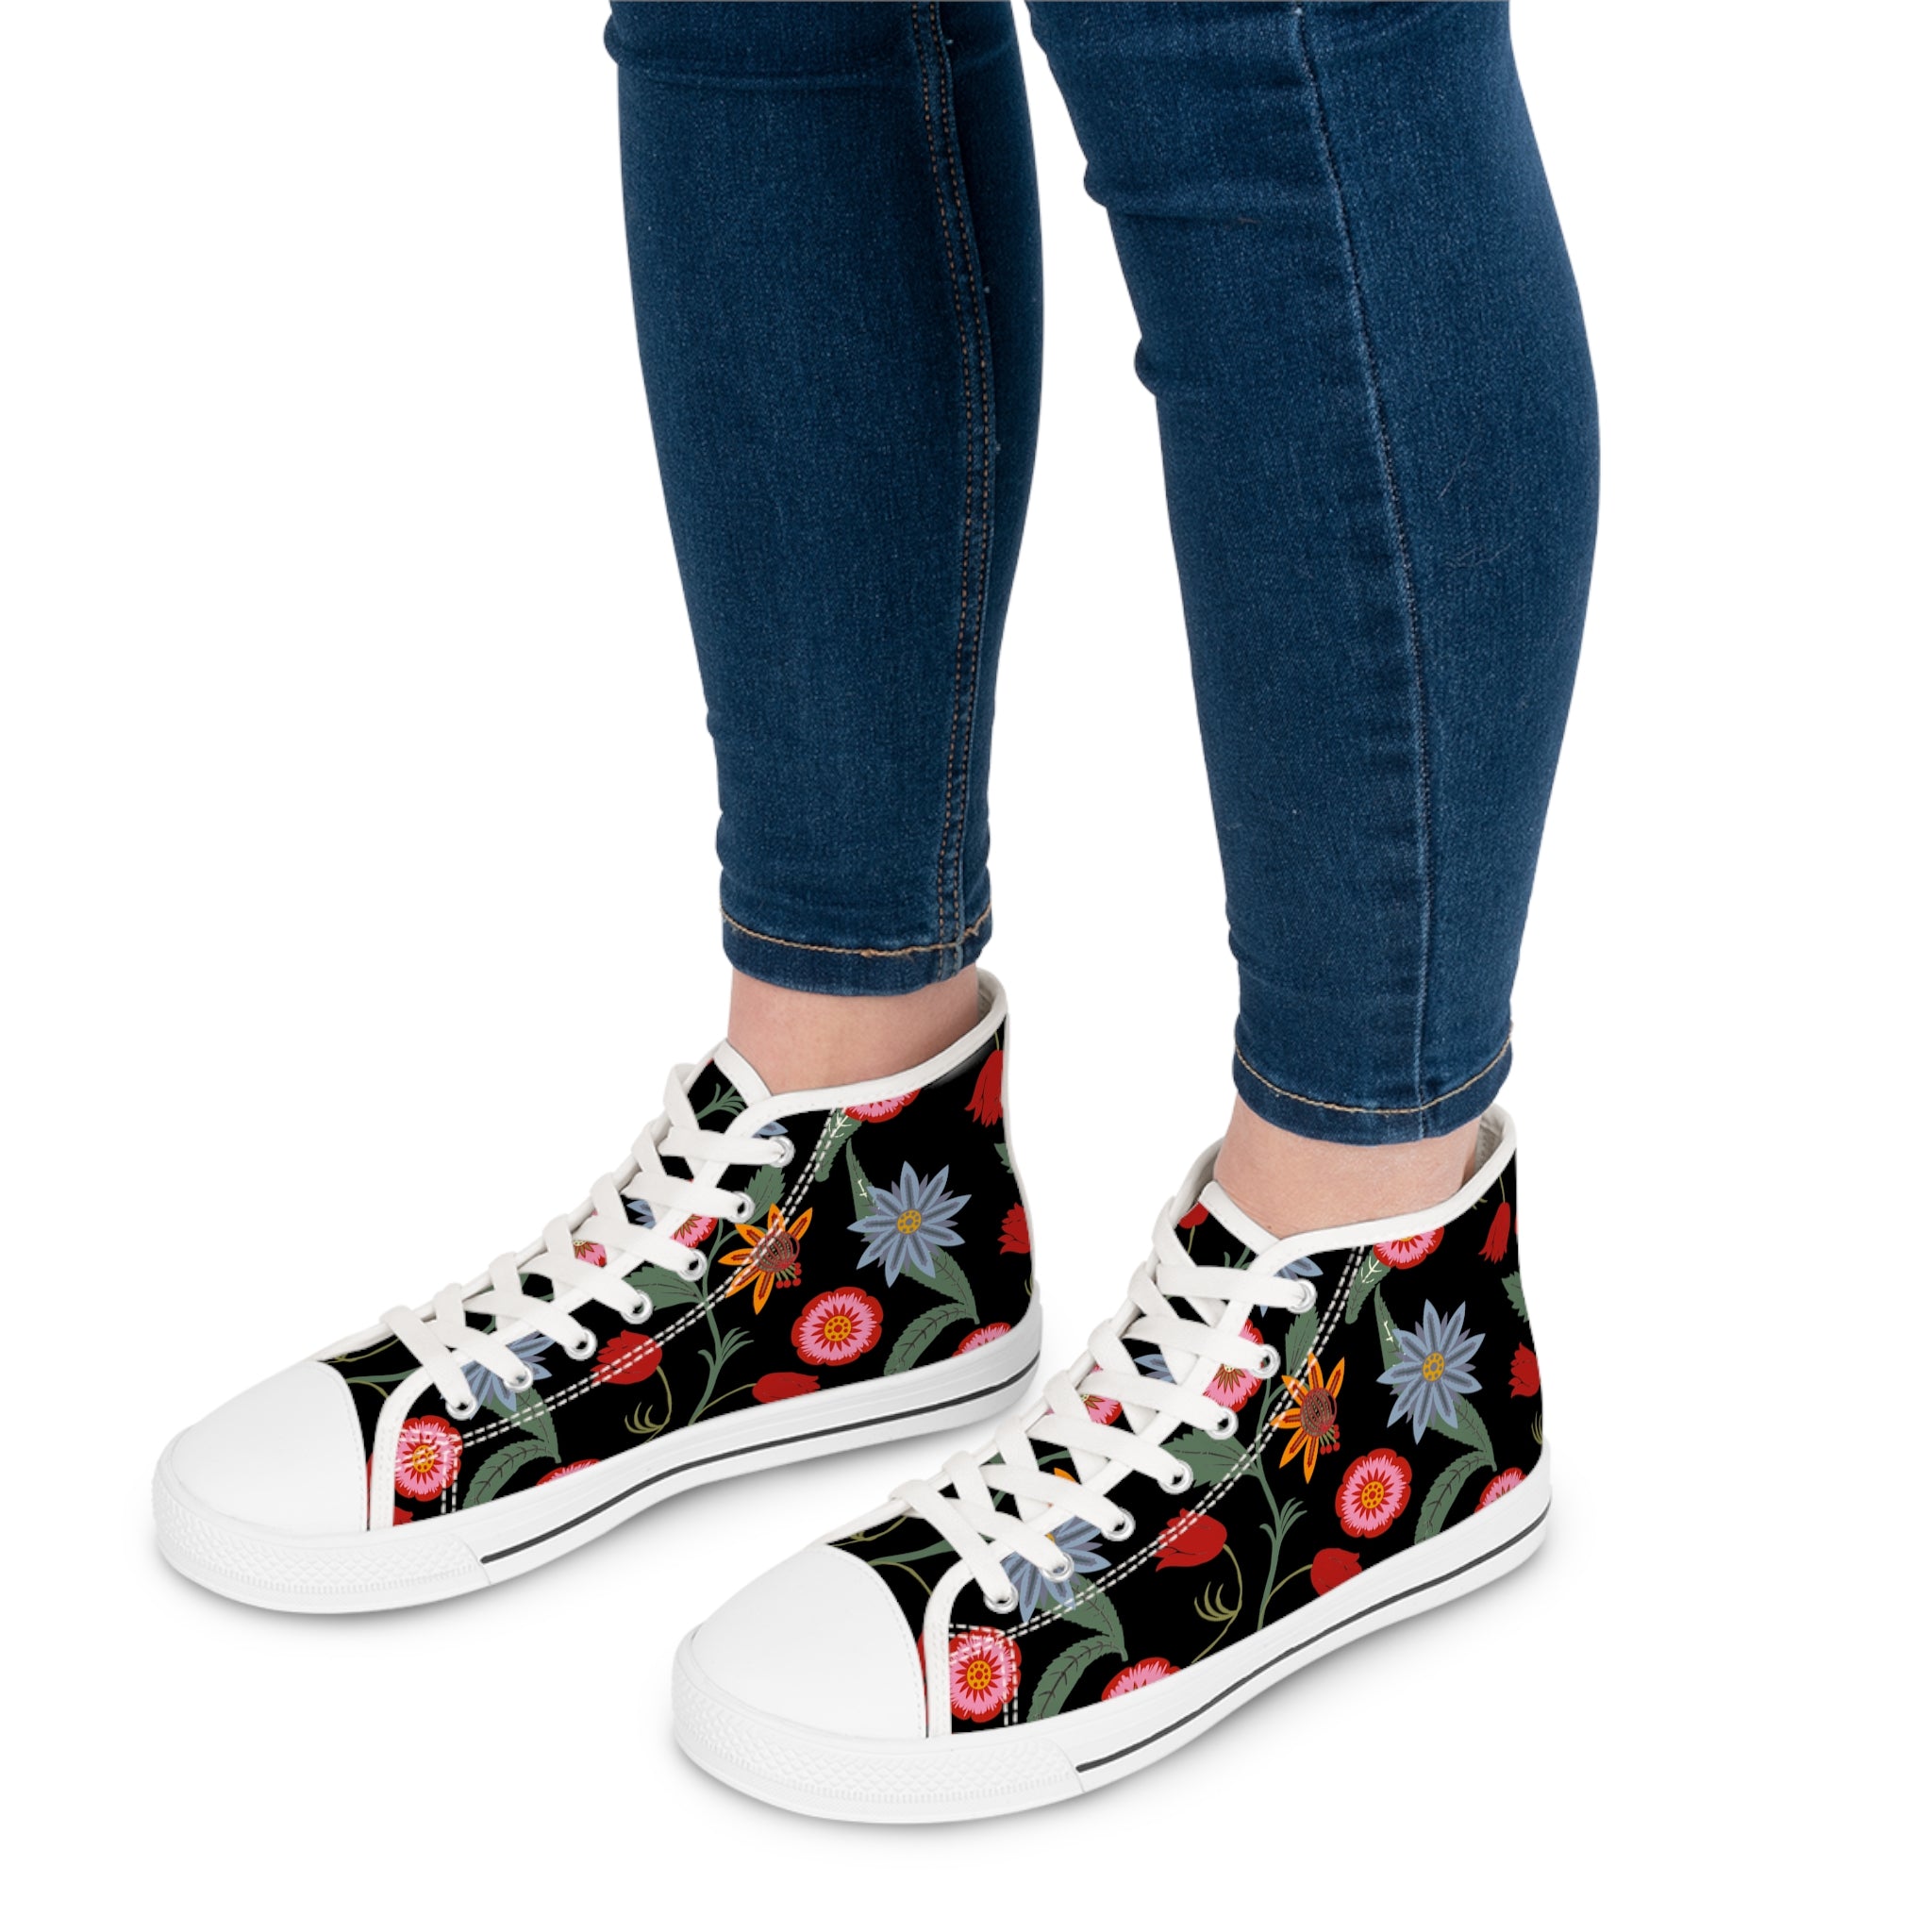  Women's Casual Wear Collection Stay Wild (Flowers) Women's High Top Sneakers, Ladies High-Tops Shoes